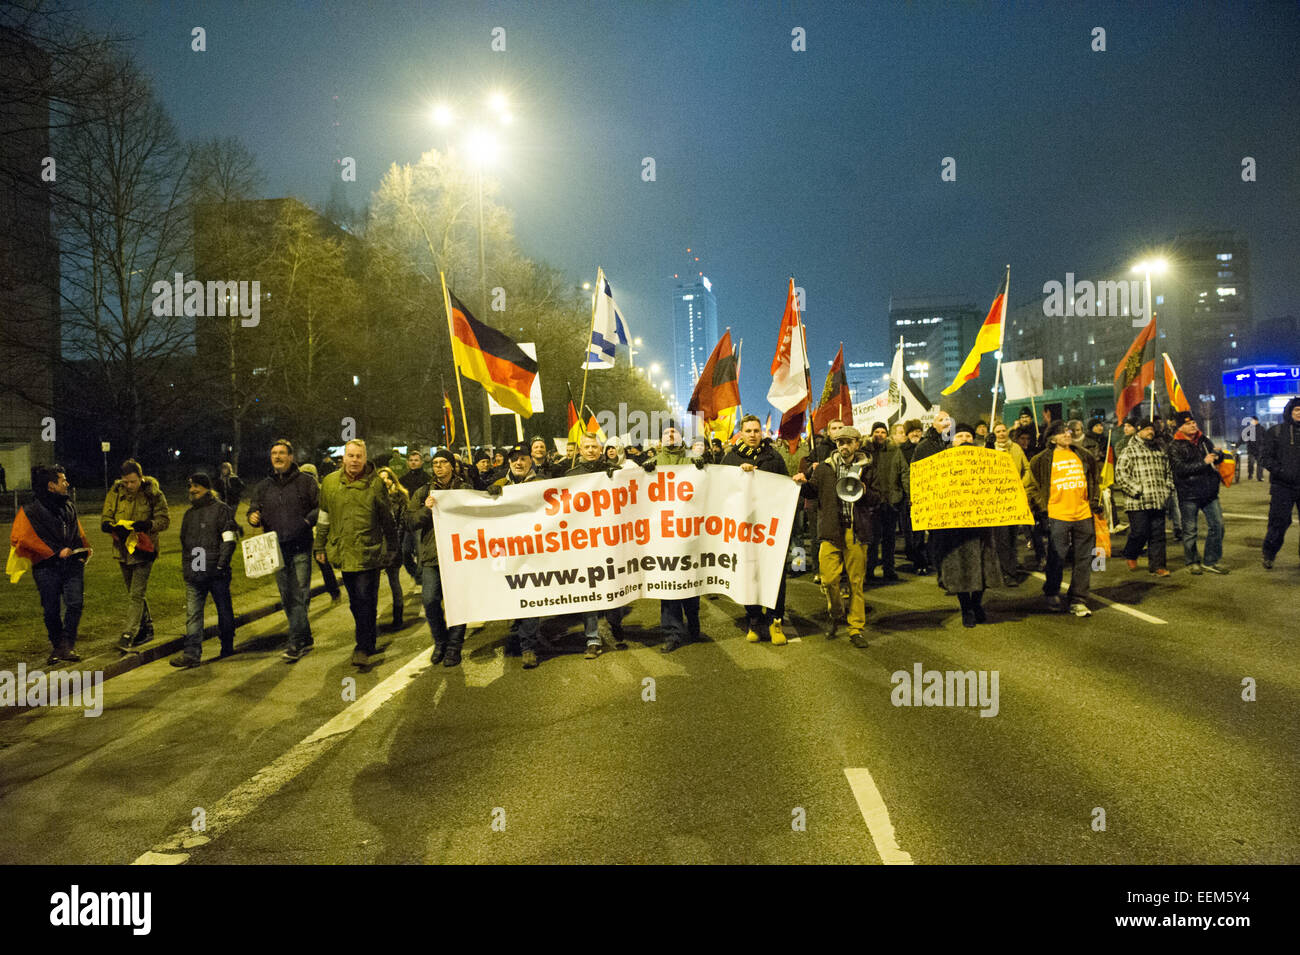 Berlin, Germany. 19th Jan, 2015. Supporters of the Islam-critical 'Baergida' (Berlin patriots against the Islamization of the West) movement demonstrate holding a placard inscribed 'Stoppt die Islamisierung Europas' (lit. 'Stop the Islamization of Europe') in Berlin, Germany, 19 January 2015. A terrorist threat by Islamists against the 'Pegida' (Patriotic Europeans against the Islamization of the West) movement has resulted in a prohibition by the police of all open-air gatherings in Dresden this Monday (19 January 2015). Photo: Paul Zinken/dpa/Alamy Live News Stock Photo